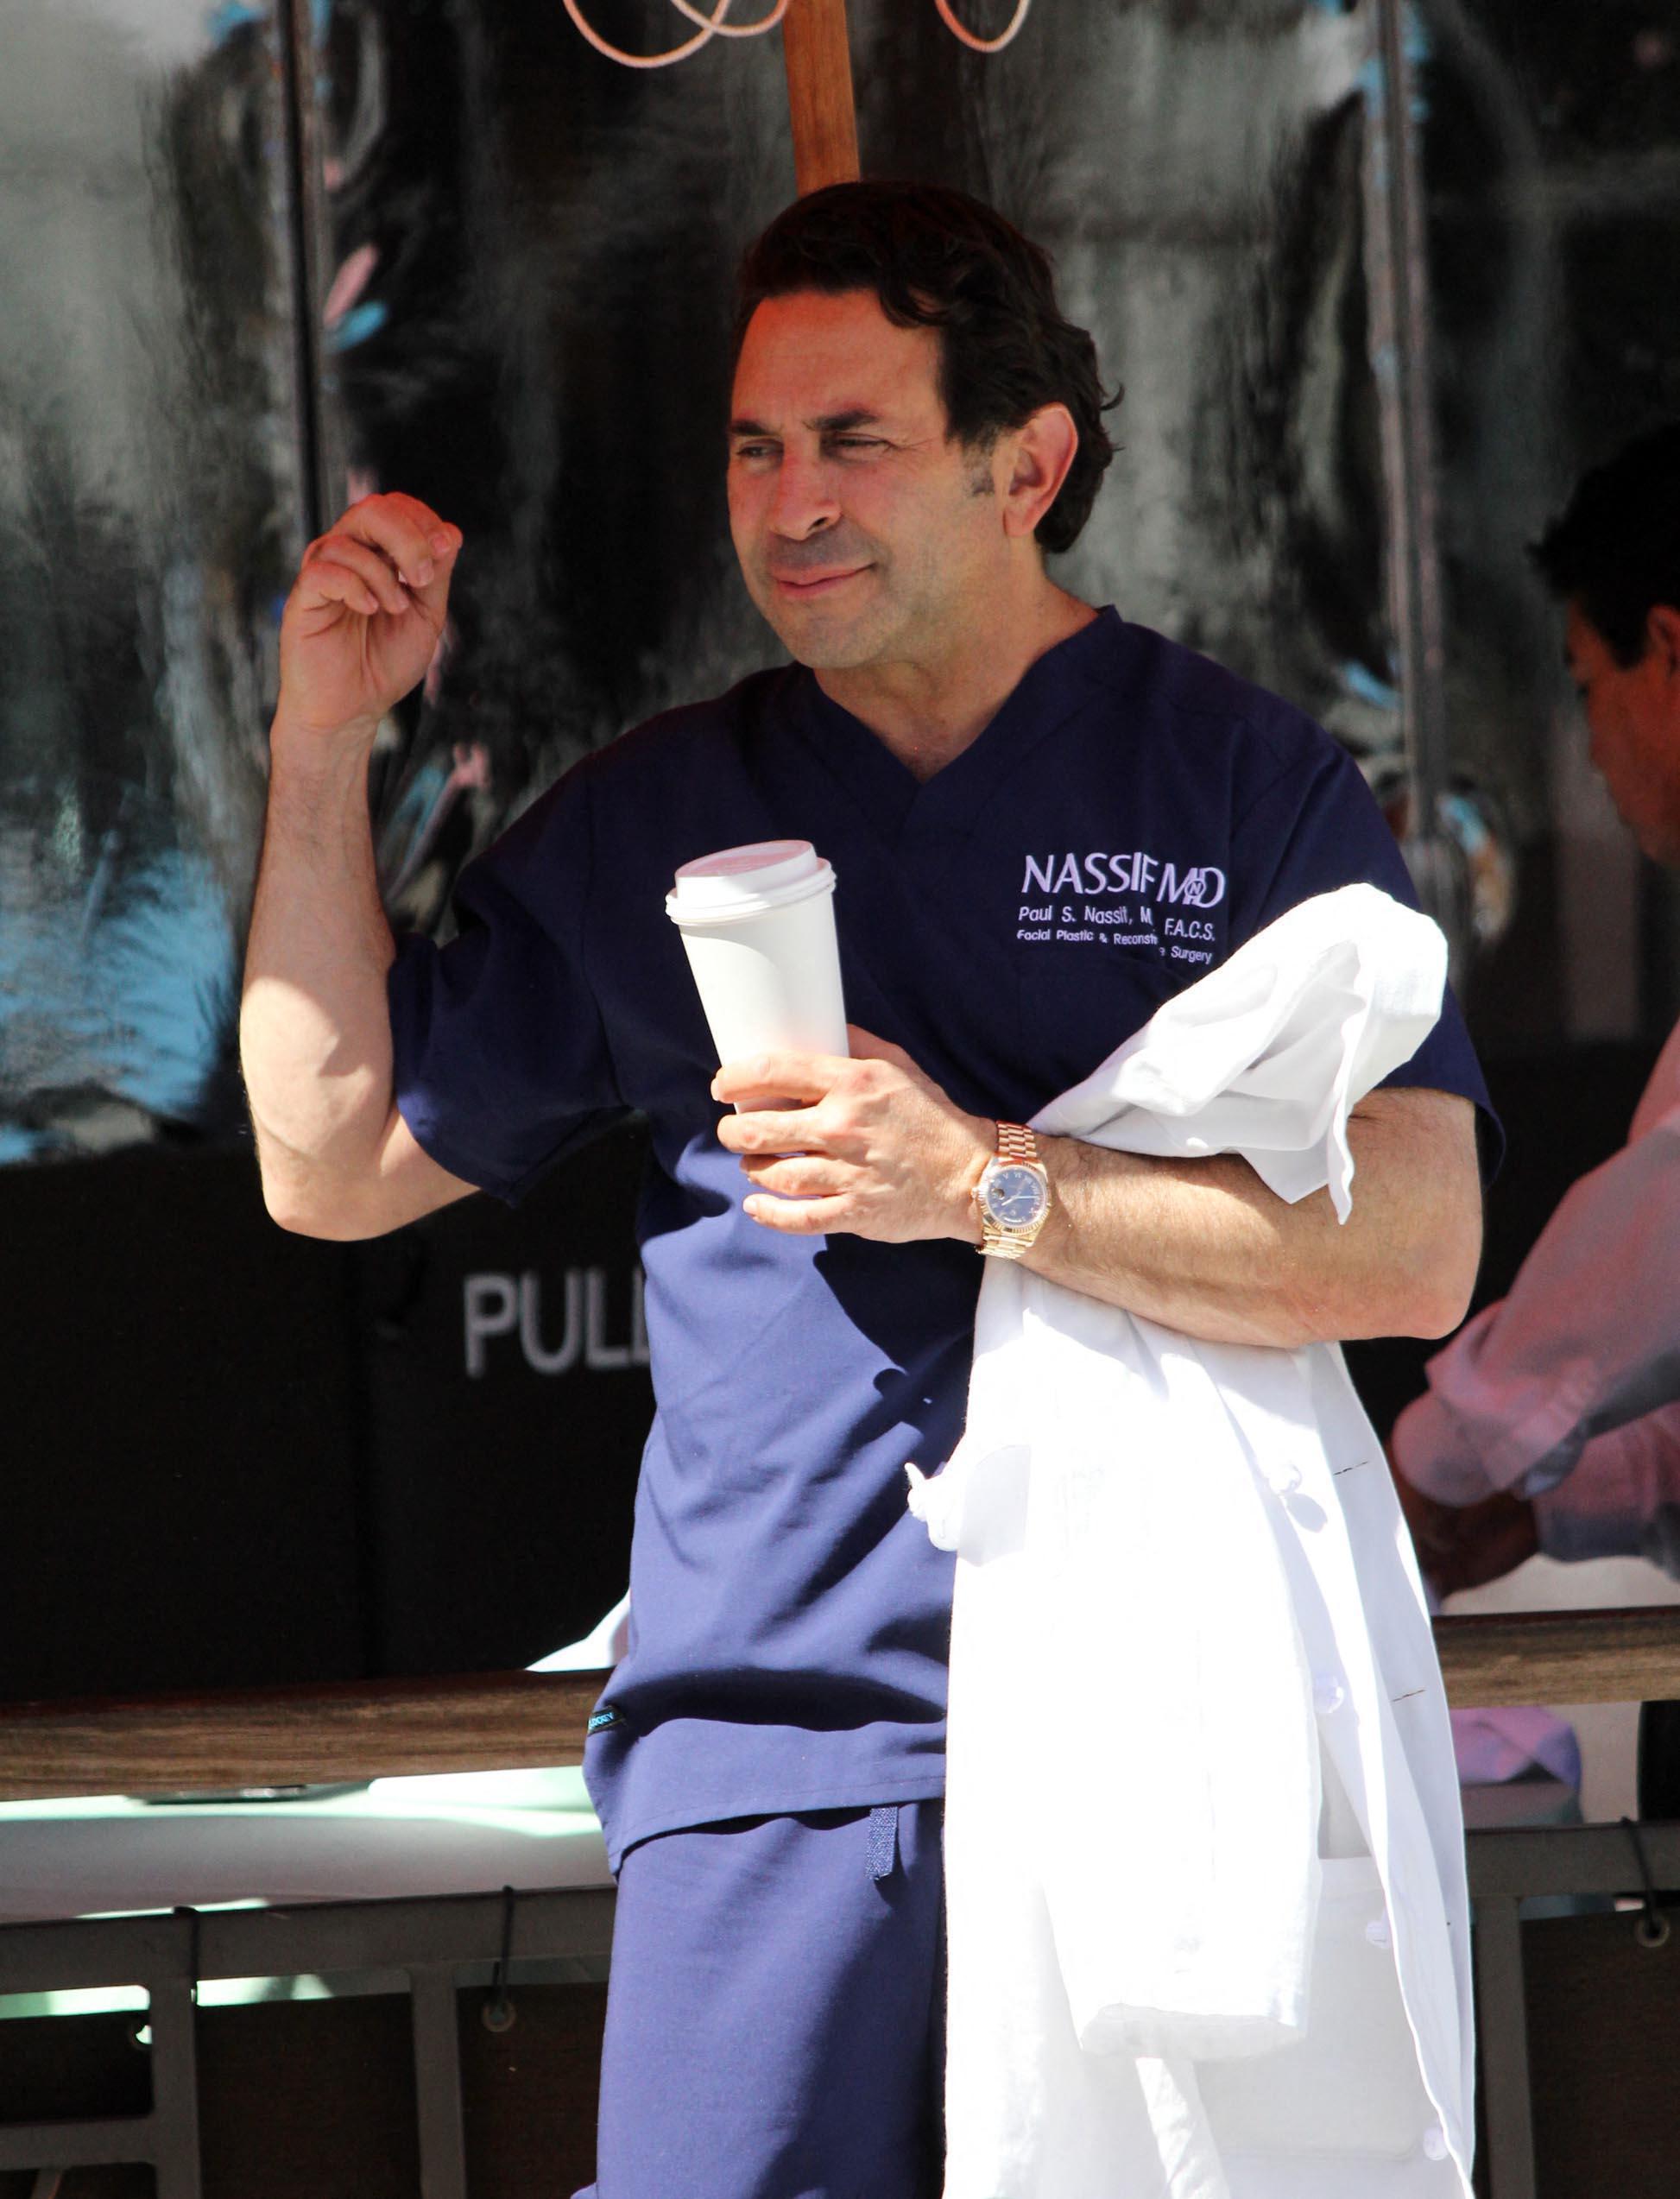 DR PAUL NASSIF OUT IN BEVERLY HILLS